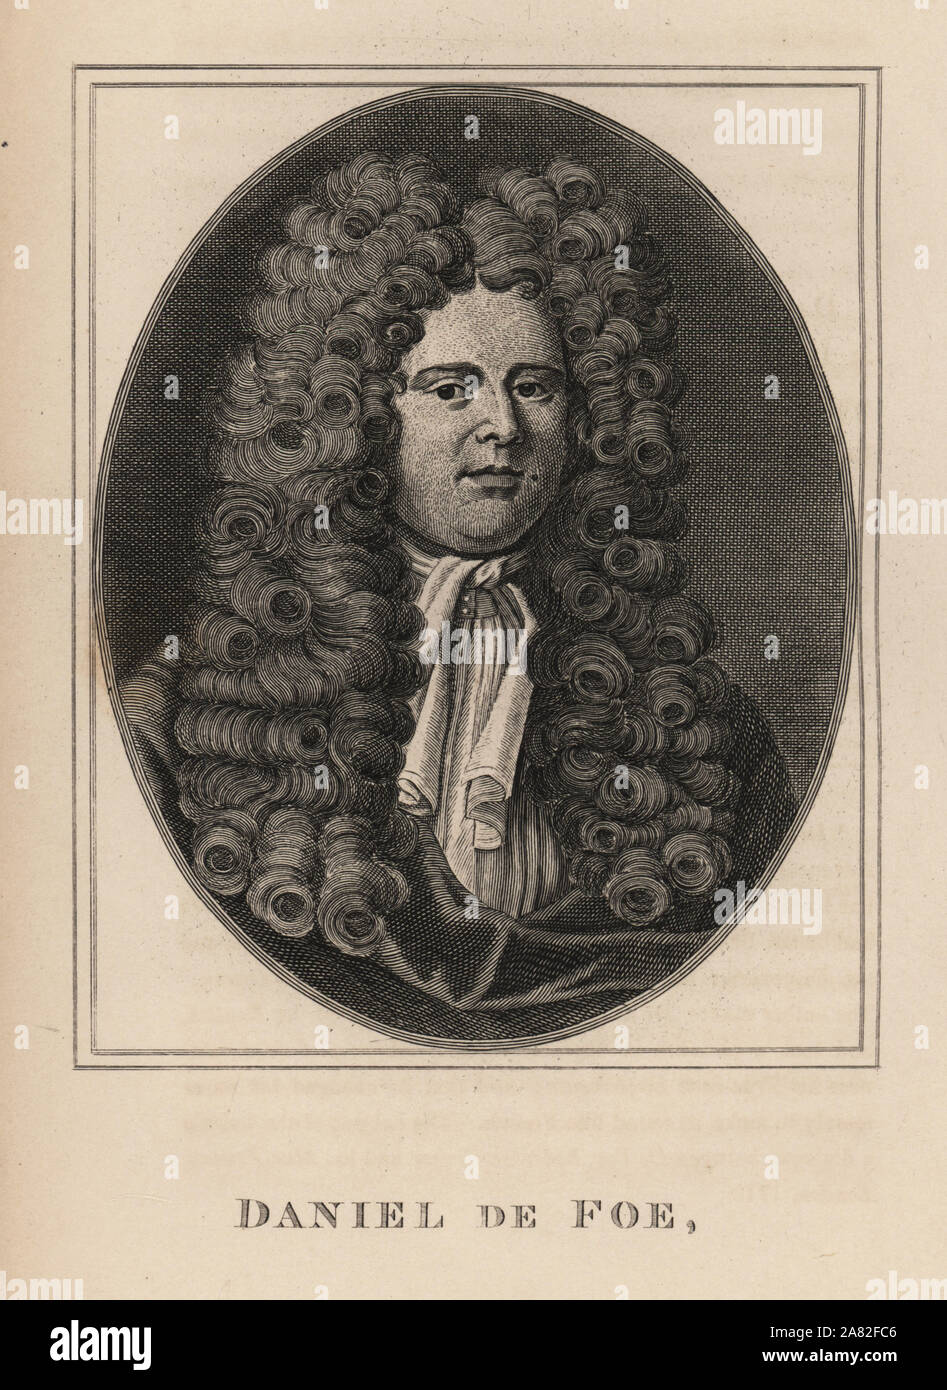 Daniel de Foe, author of Robinson Crusoe. Engraving from James Caulfield's Portraits, Memoirs and Characters of Remarkable Persons, London, 1819. Stock Photo